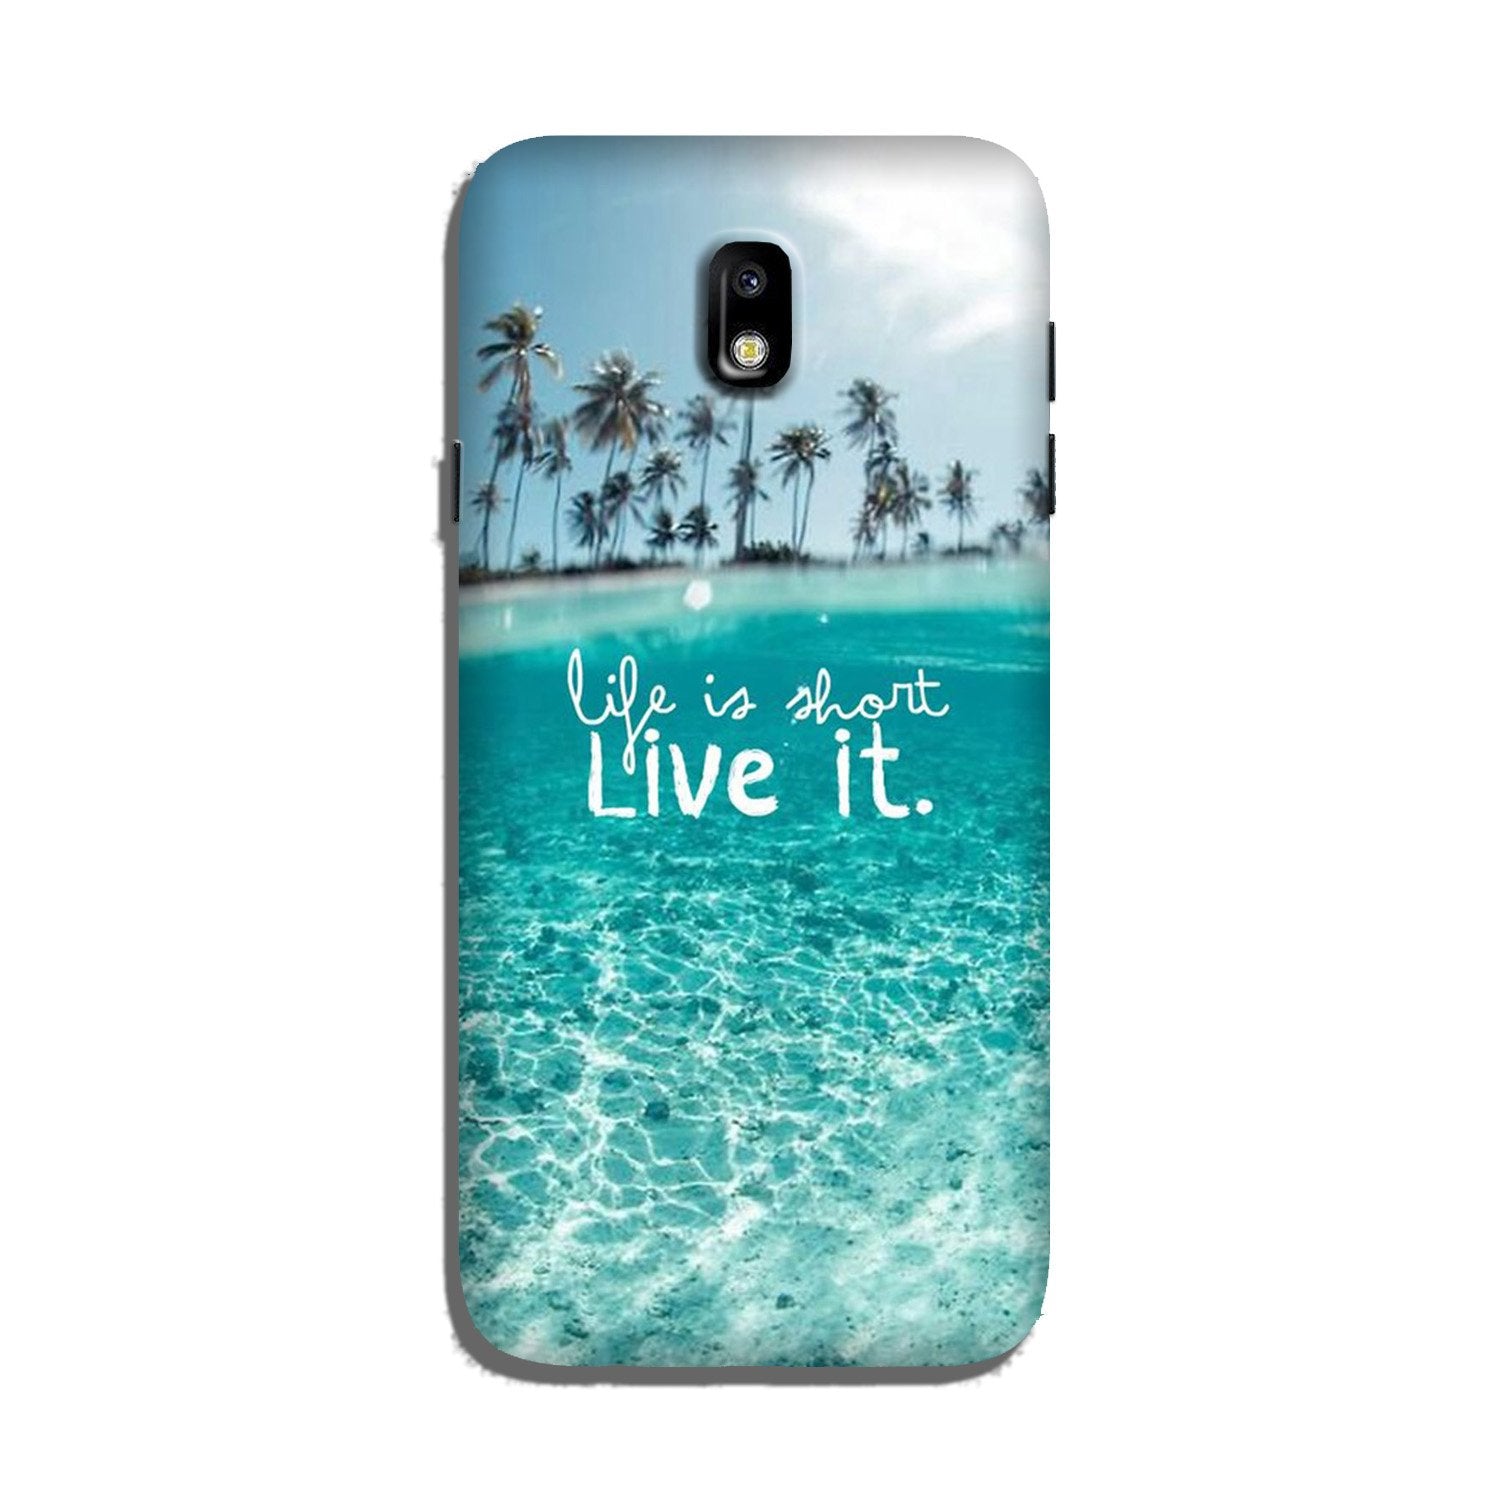 Life is short live it Case for Galaxy J5 Pro